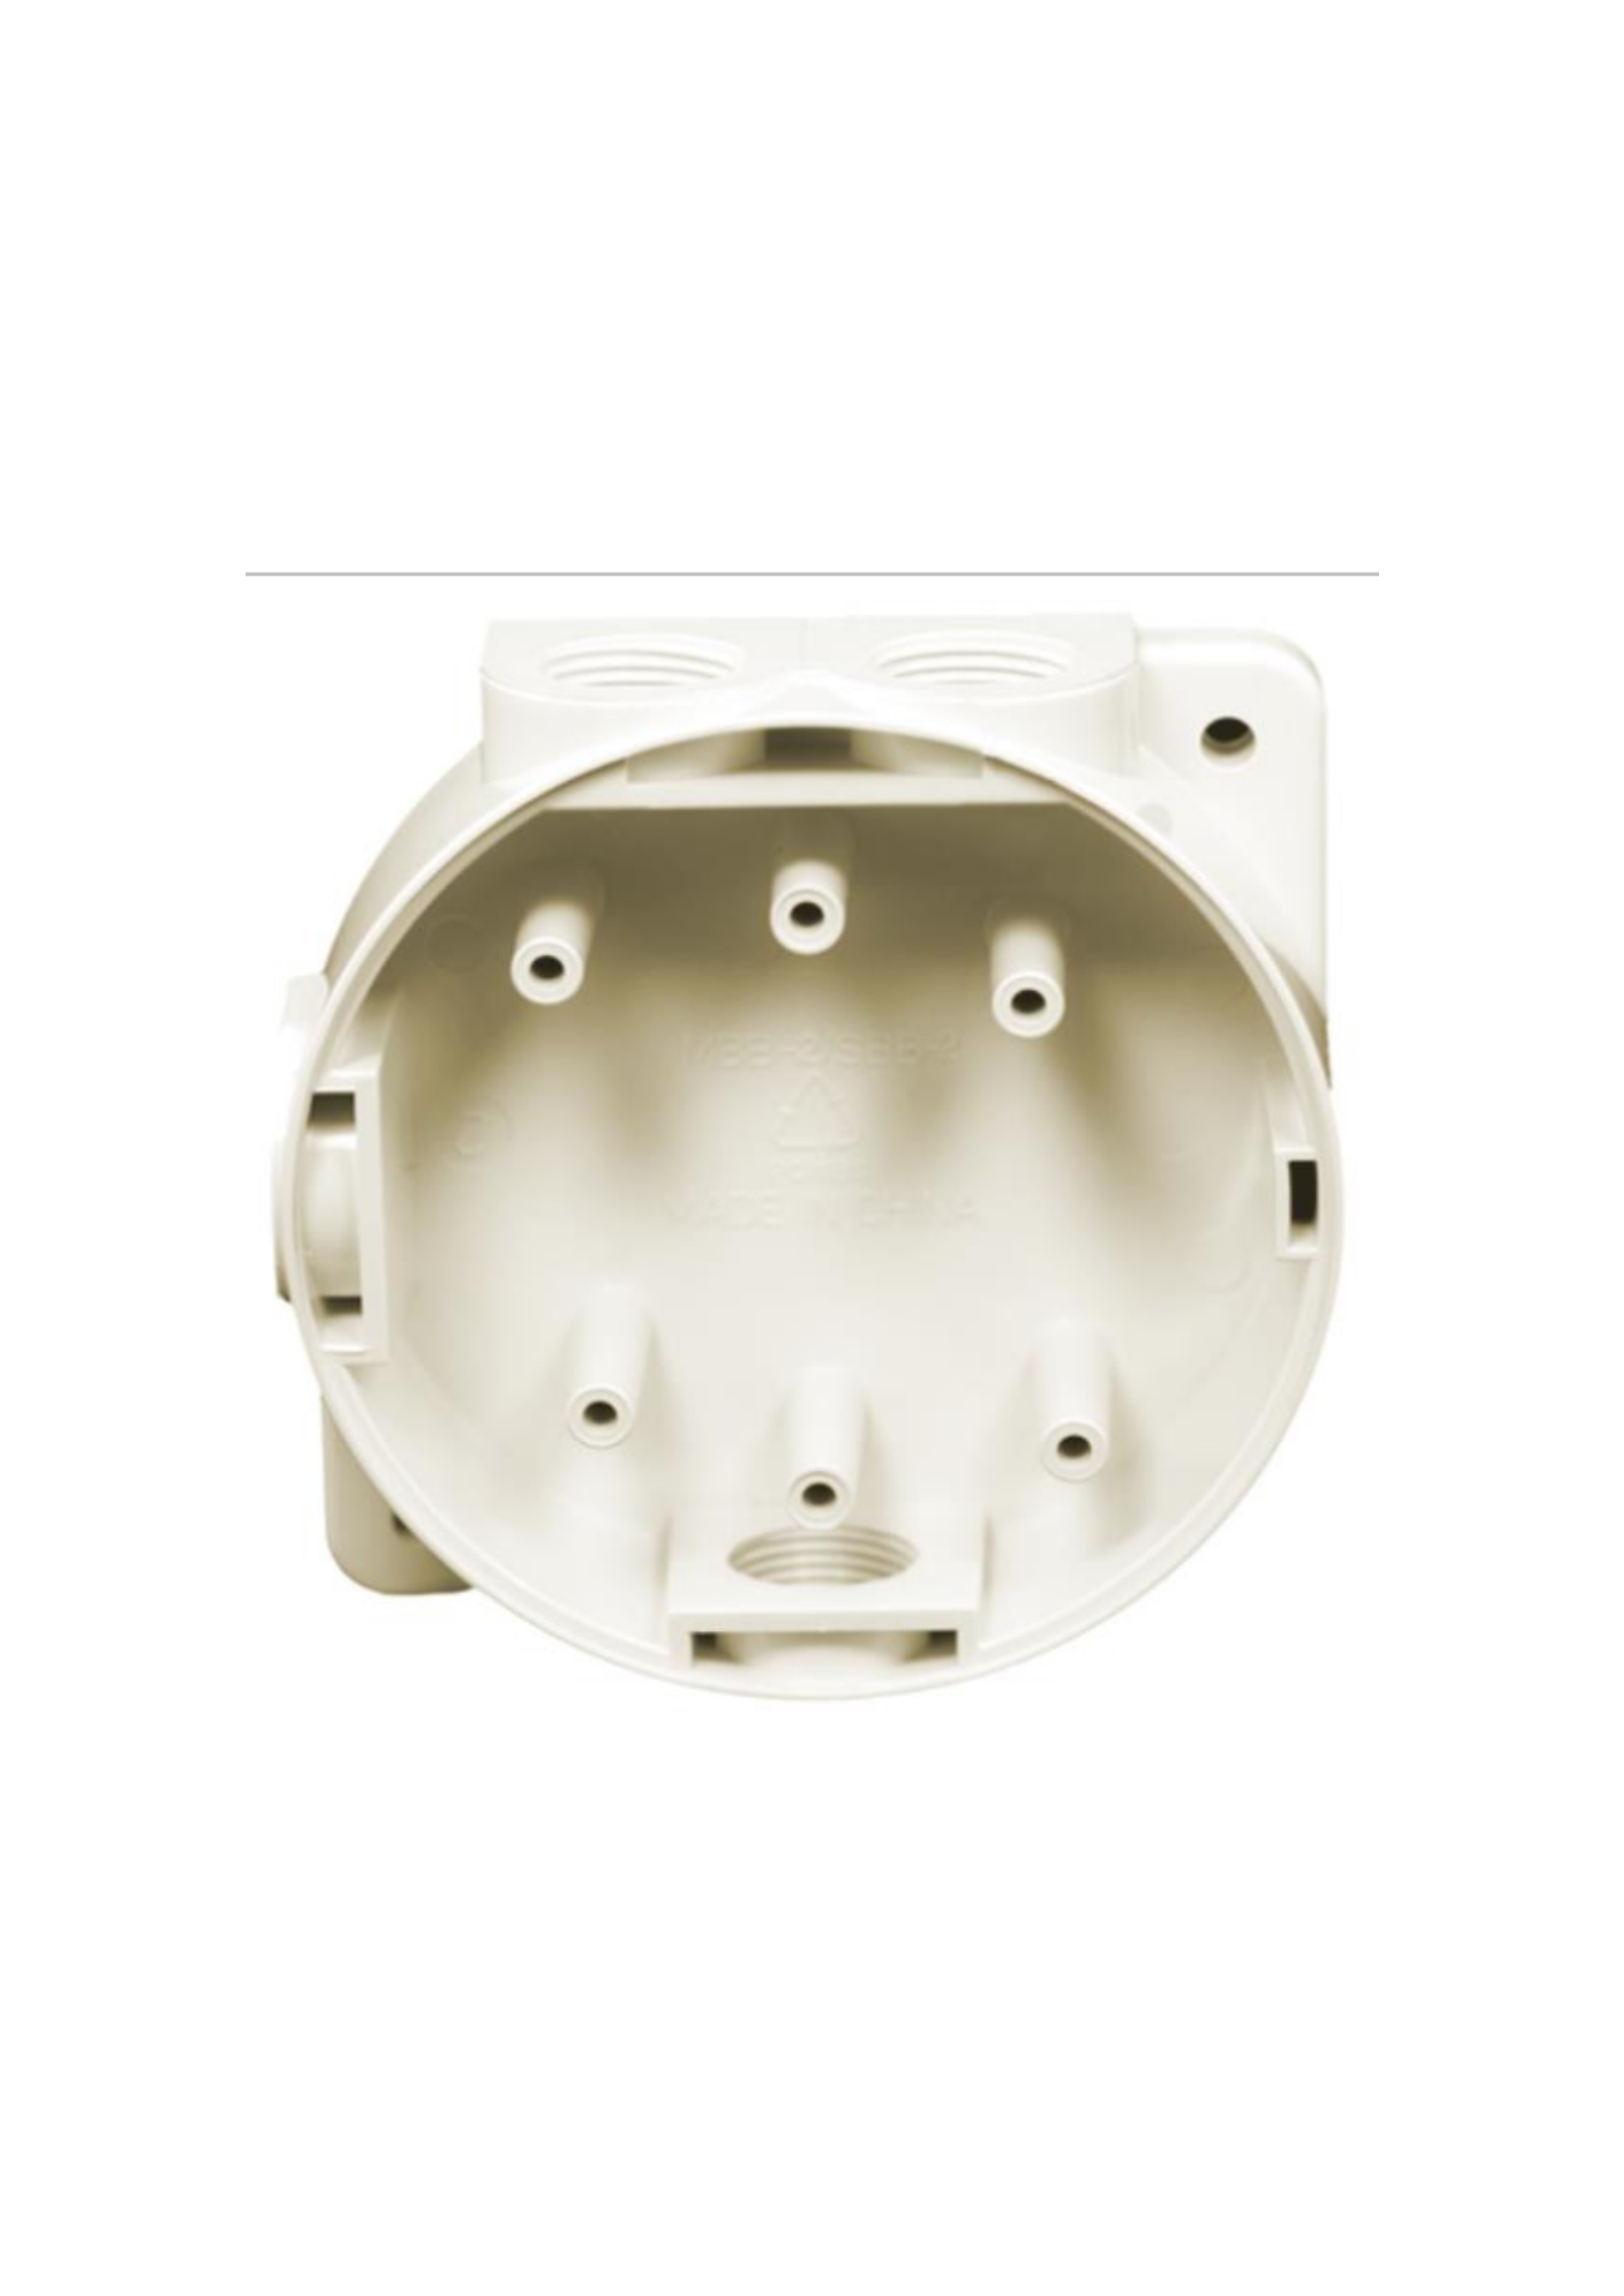 Marine Mounting Back Box with Glands - White 16706...